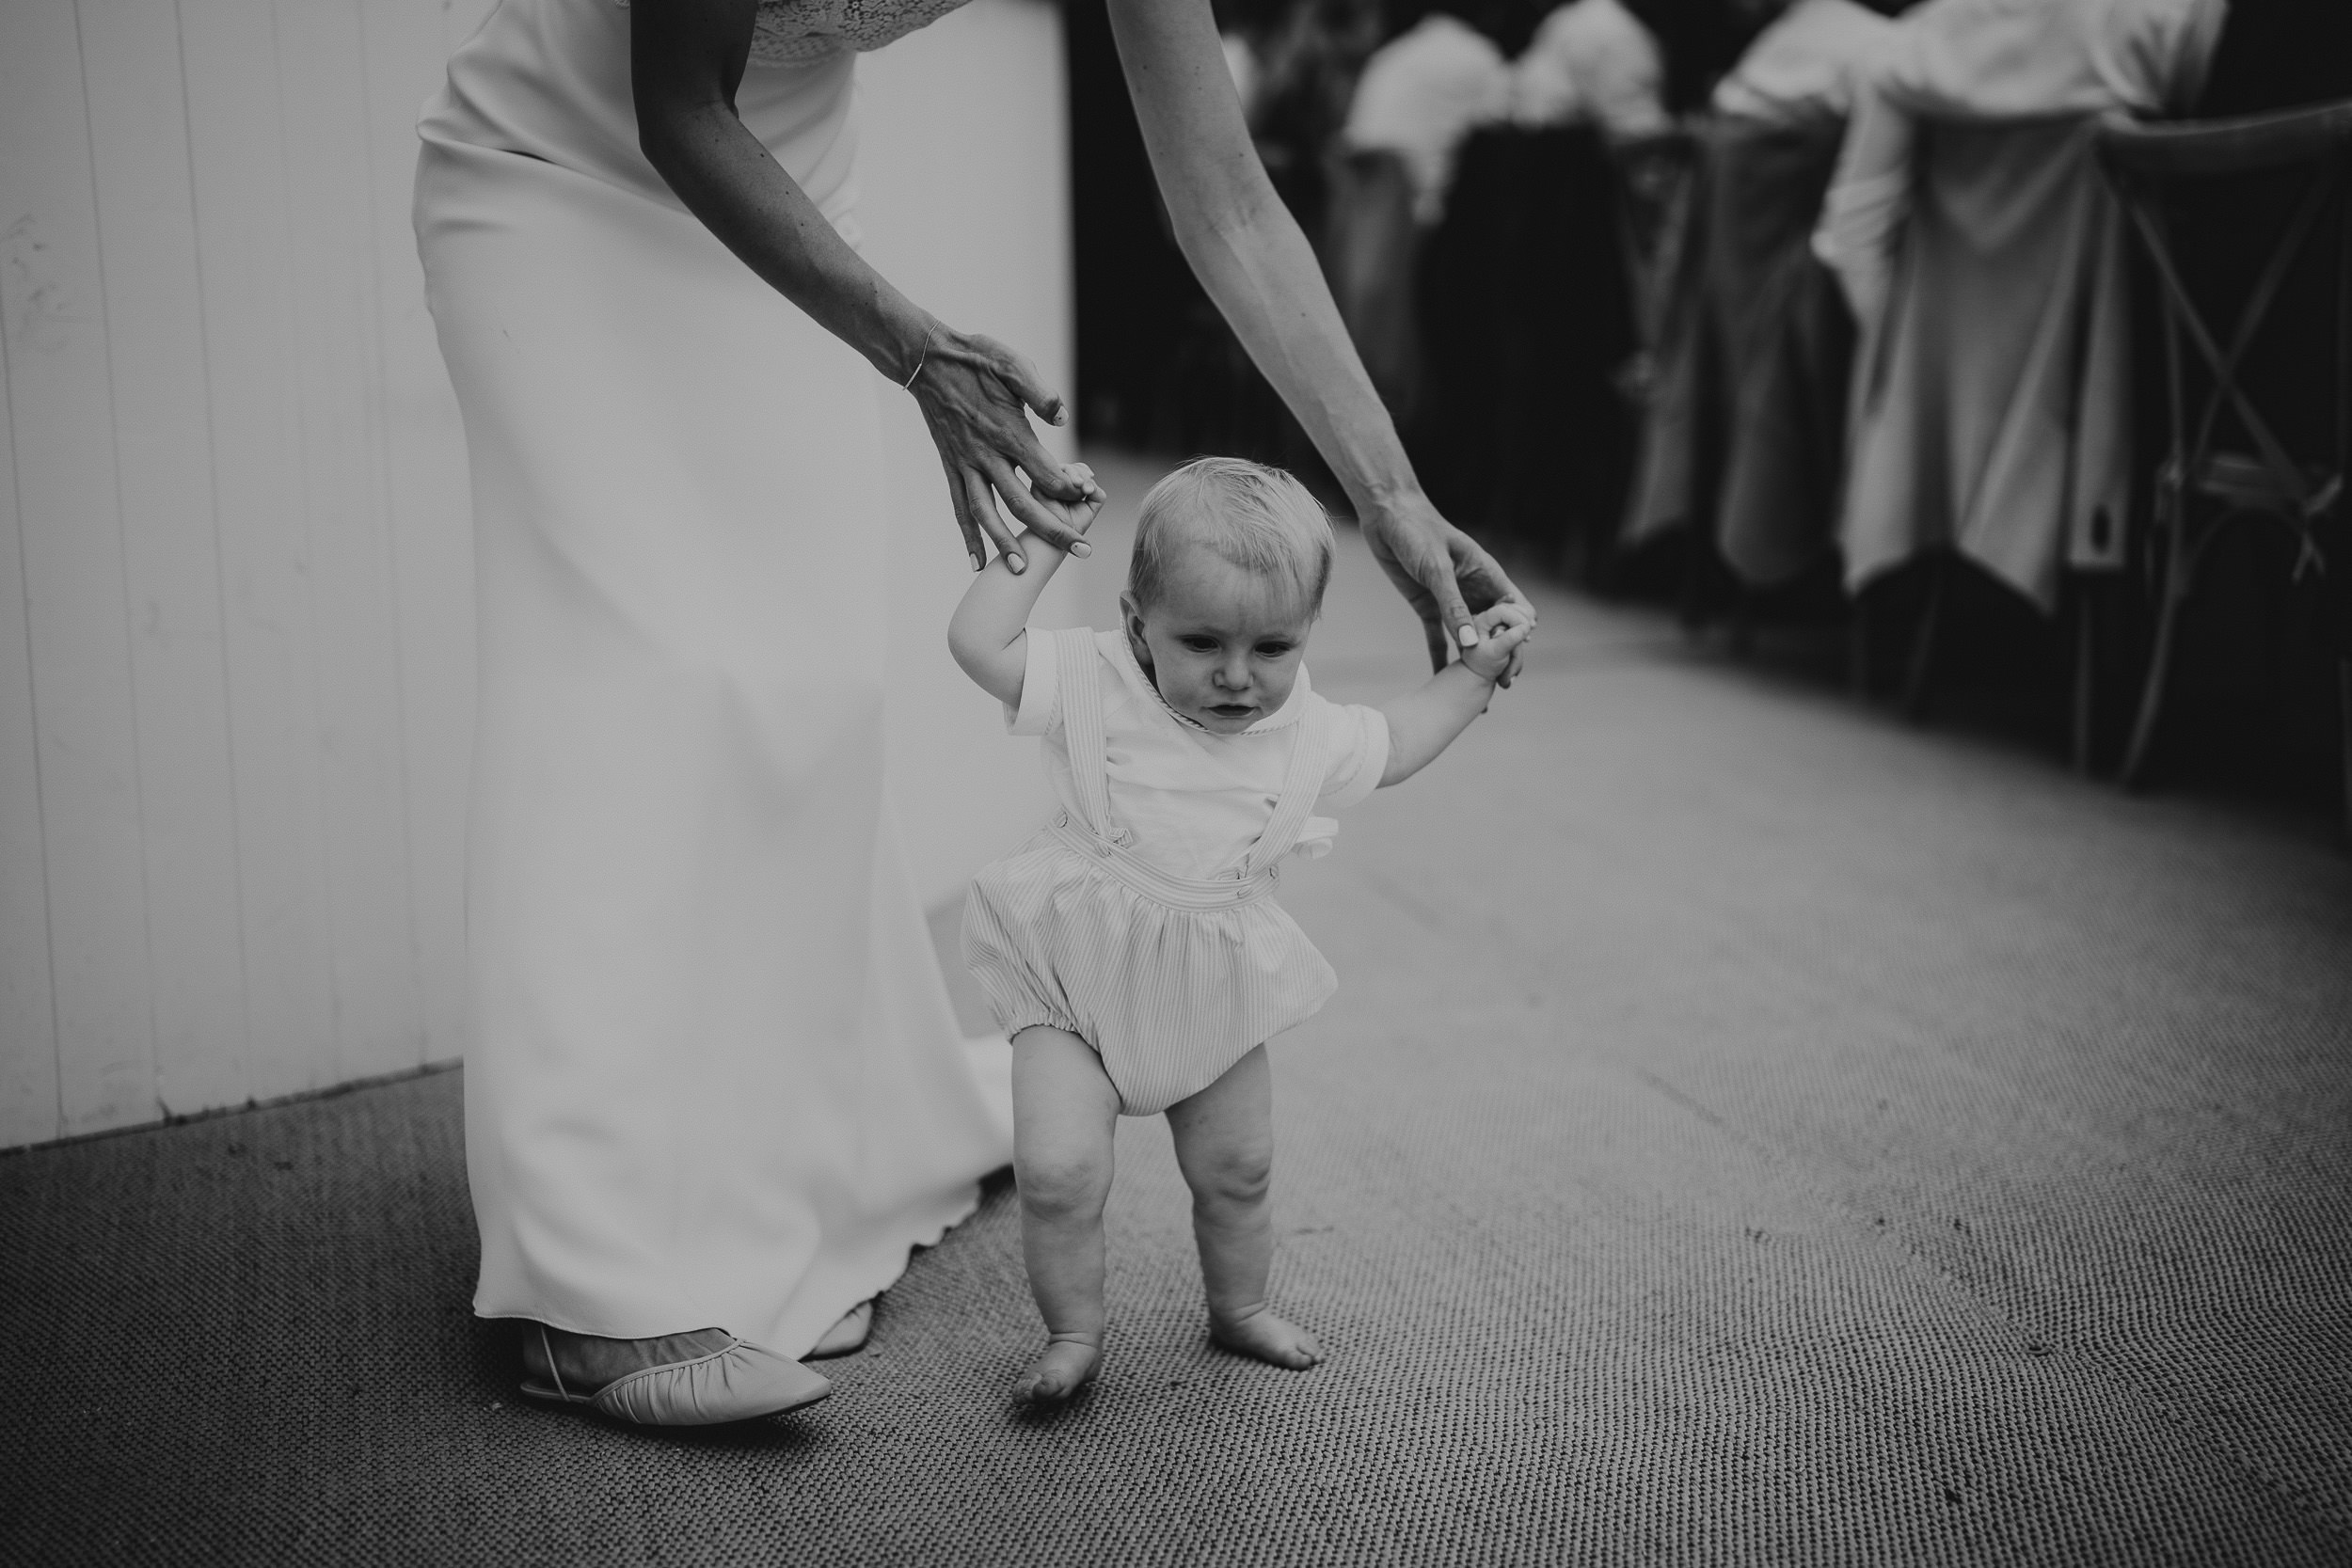 A woman holding a baby's hand walks down the aisle in a wedding photo.